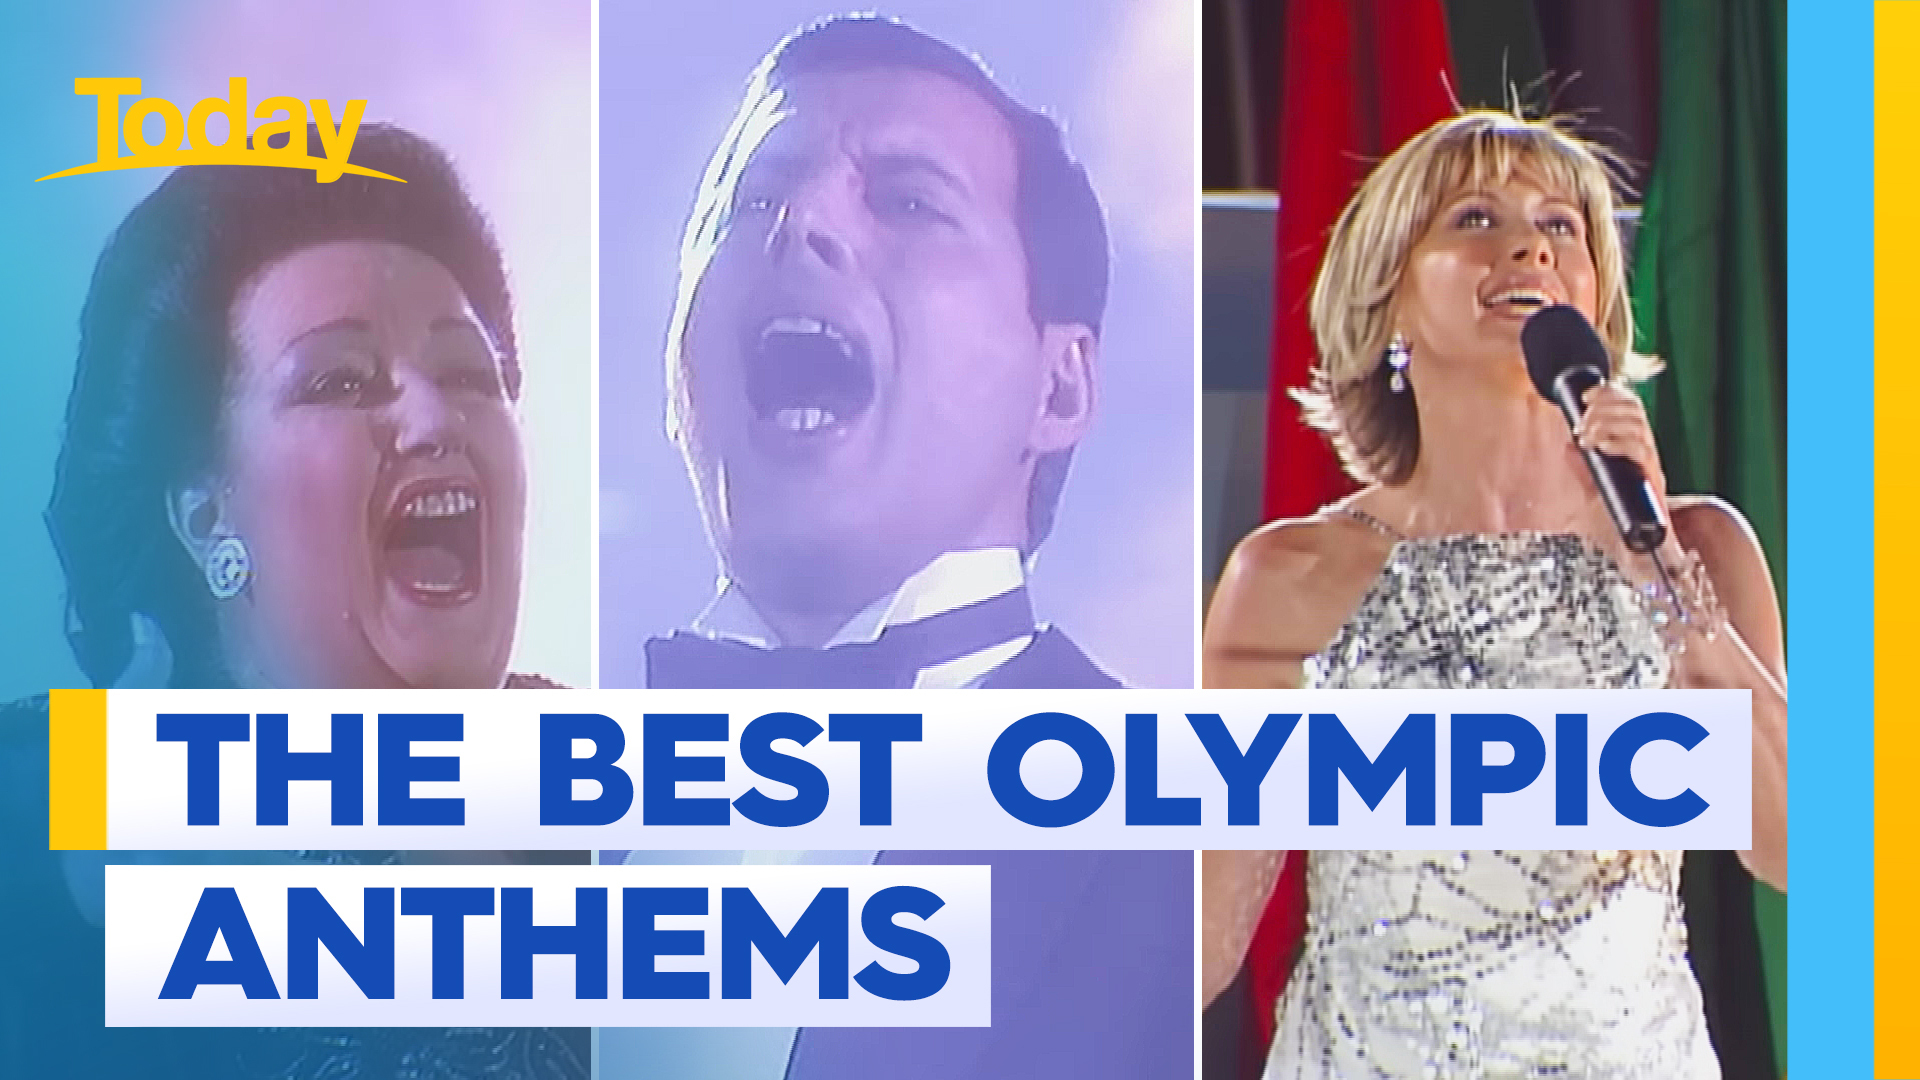 A look back at the most memorable Olympic anthems